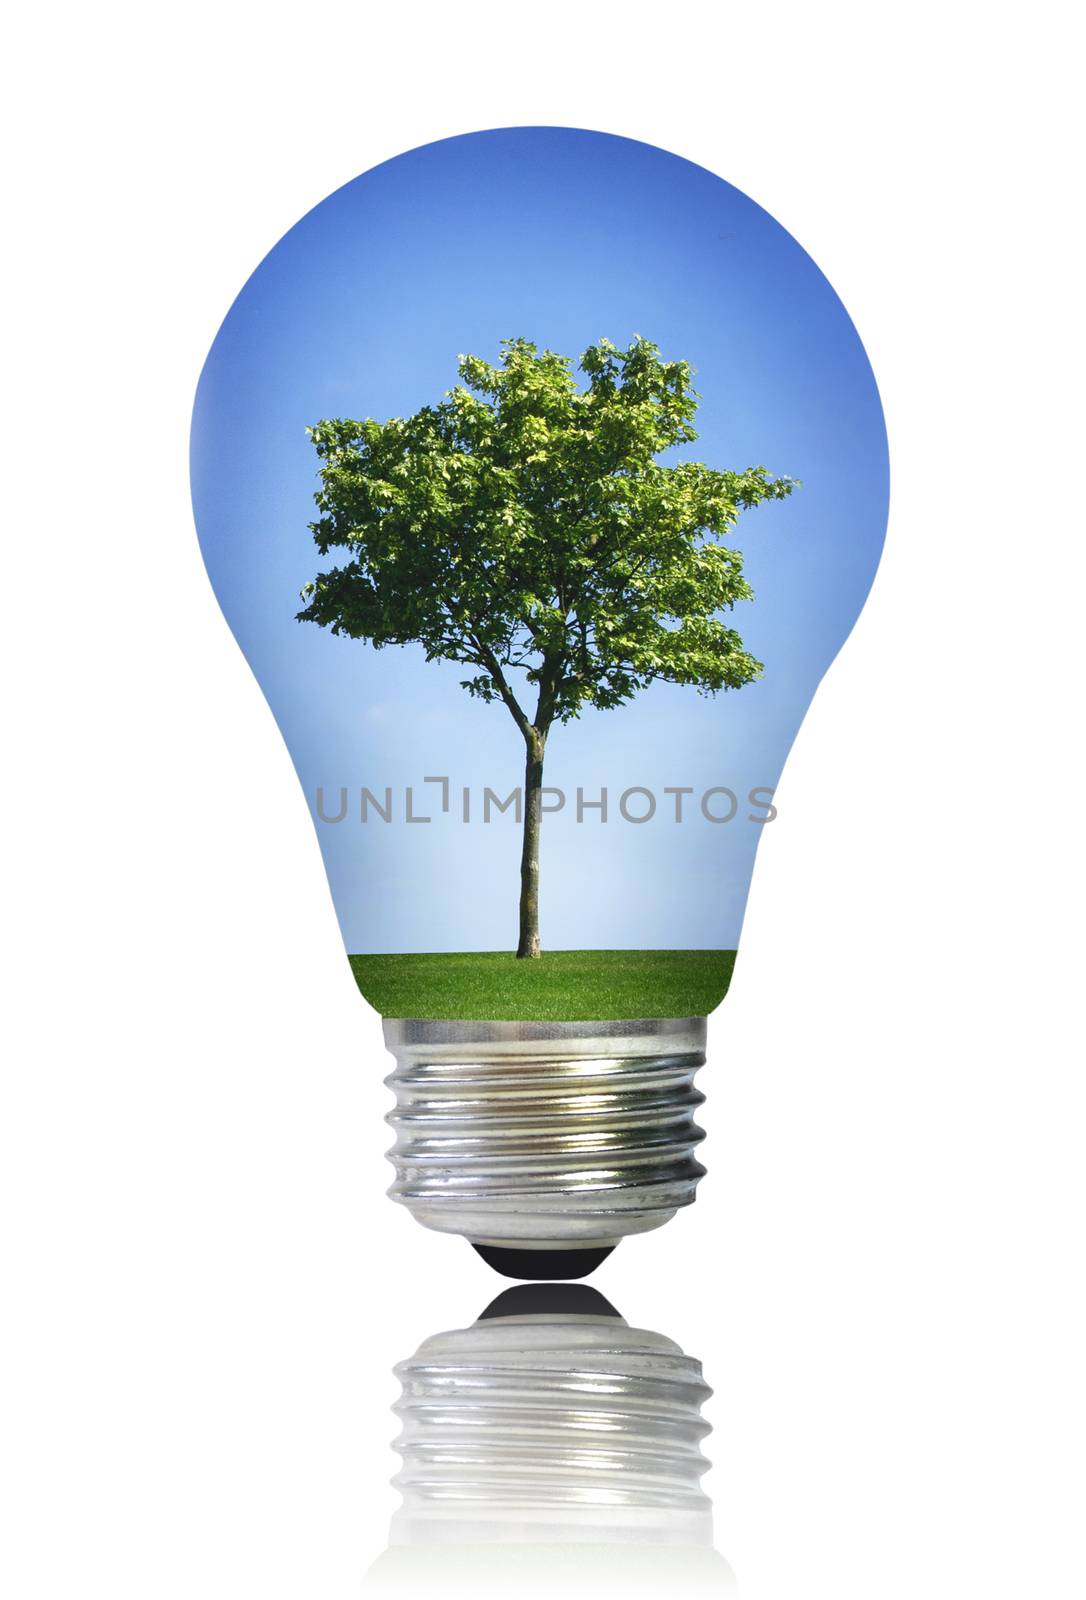 Tree with grass and blue skies inside a light bulb 